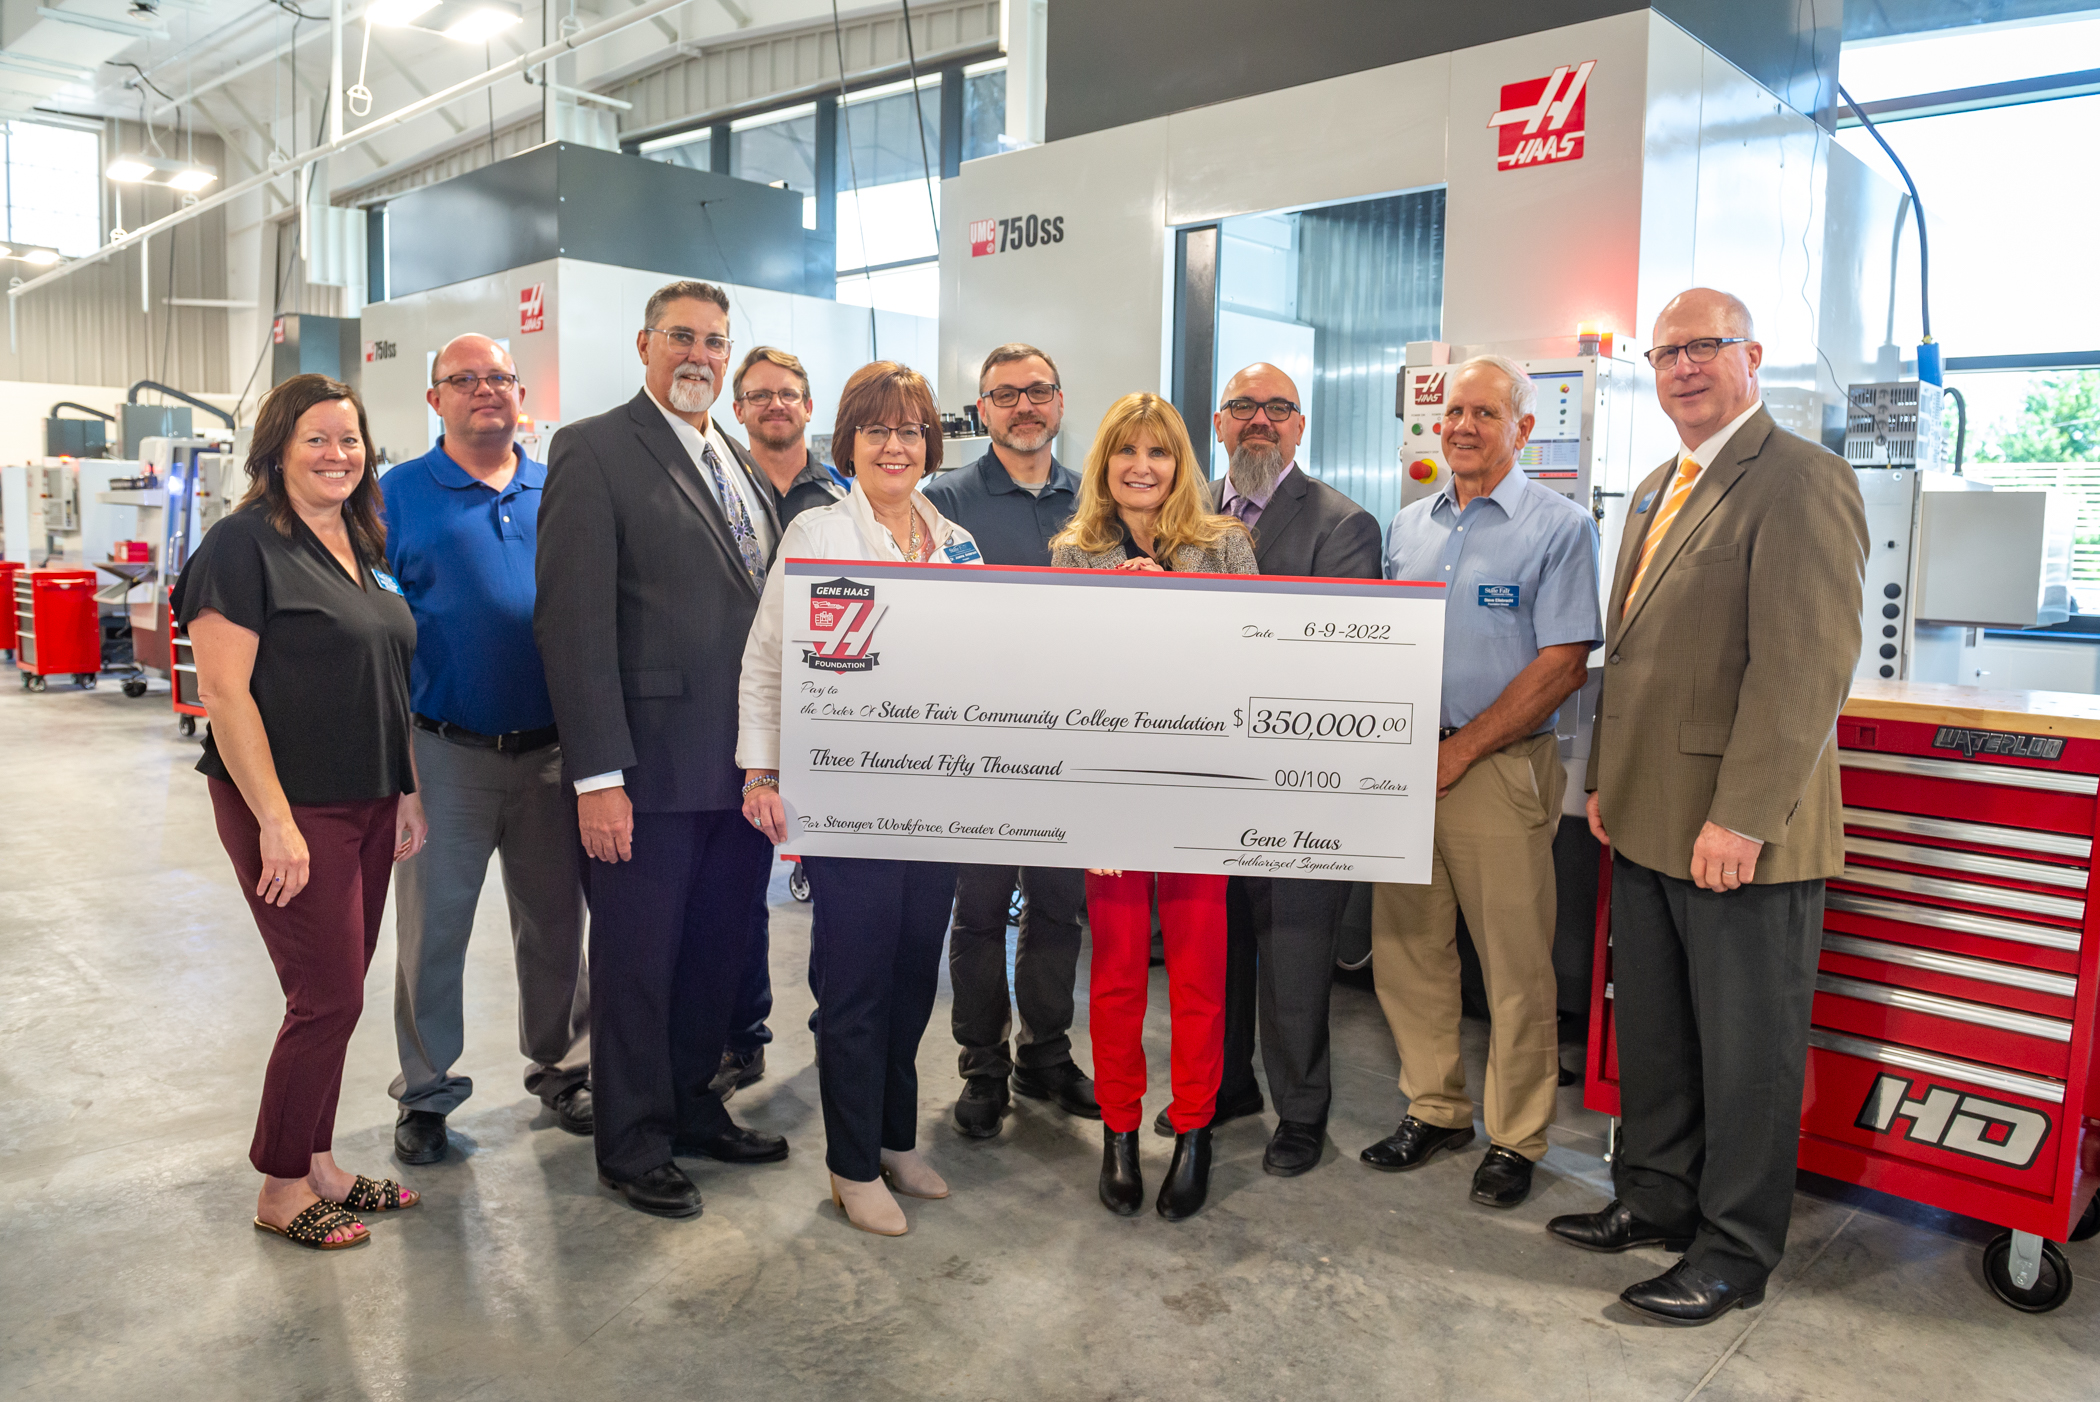 Read more about Gene Haas Foundation gives $350,000 to SFCC Foundation’s capital campaign